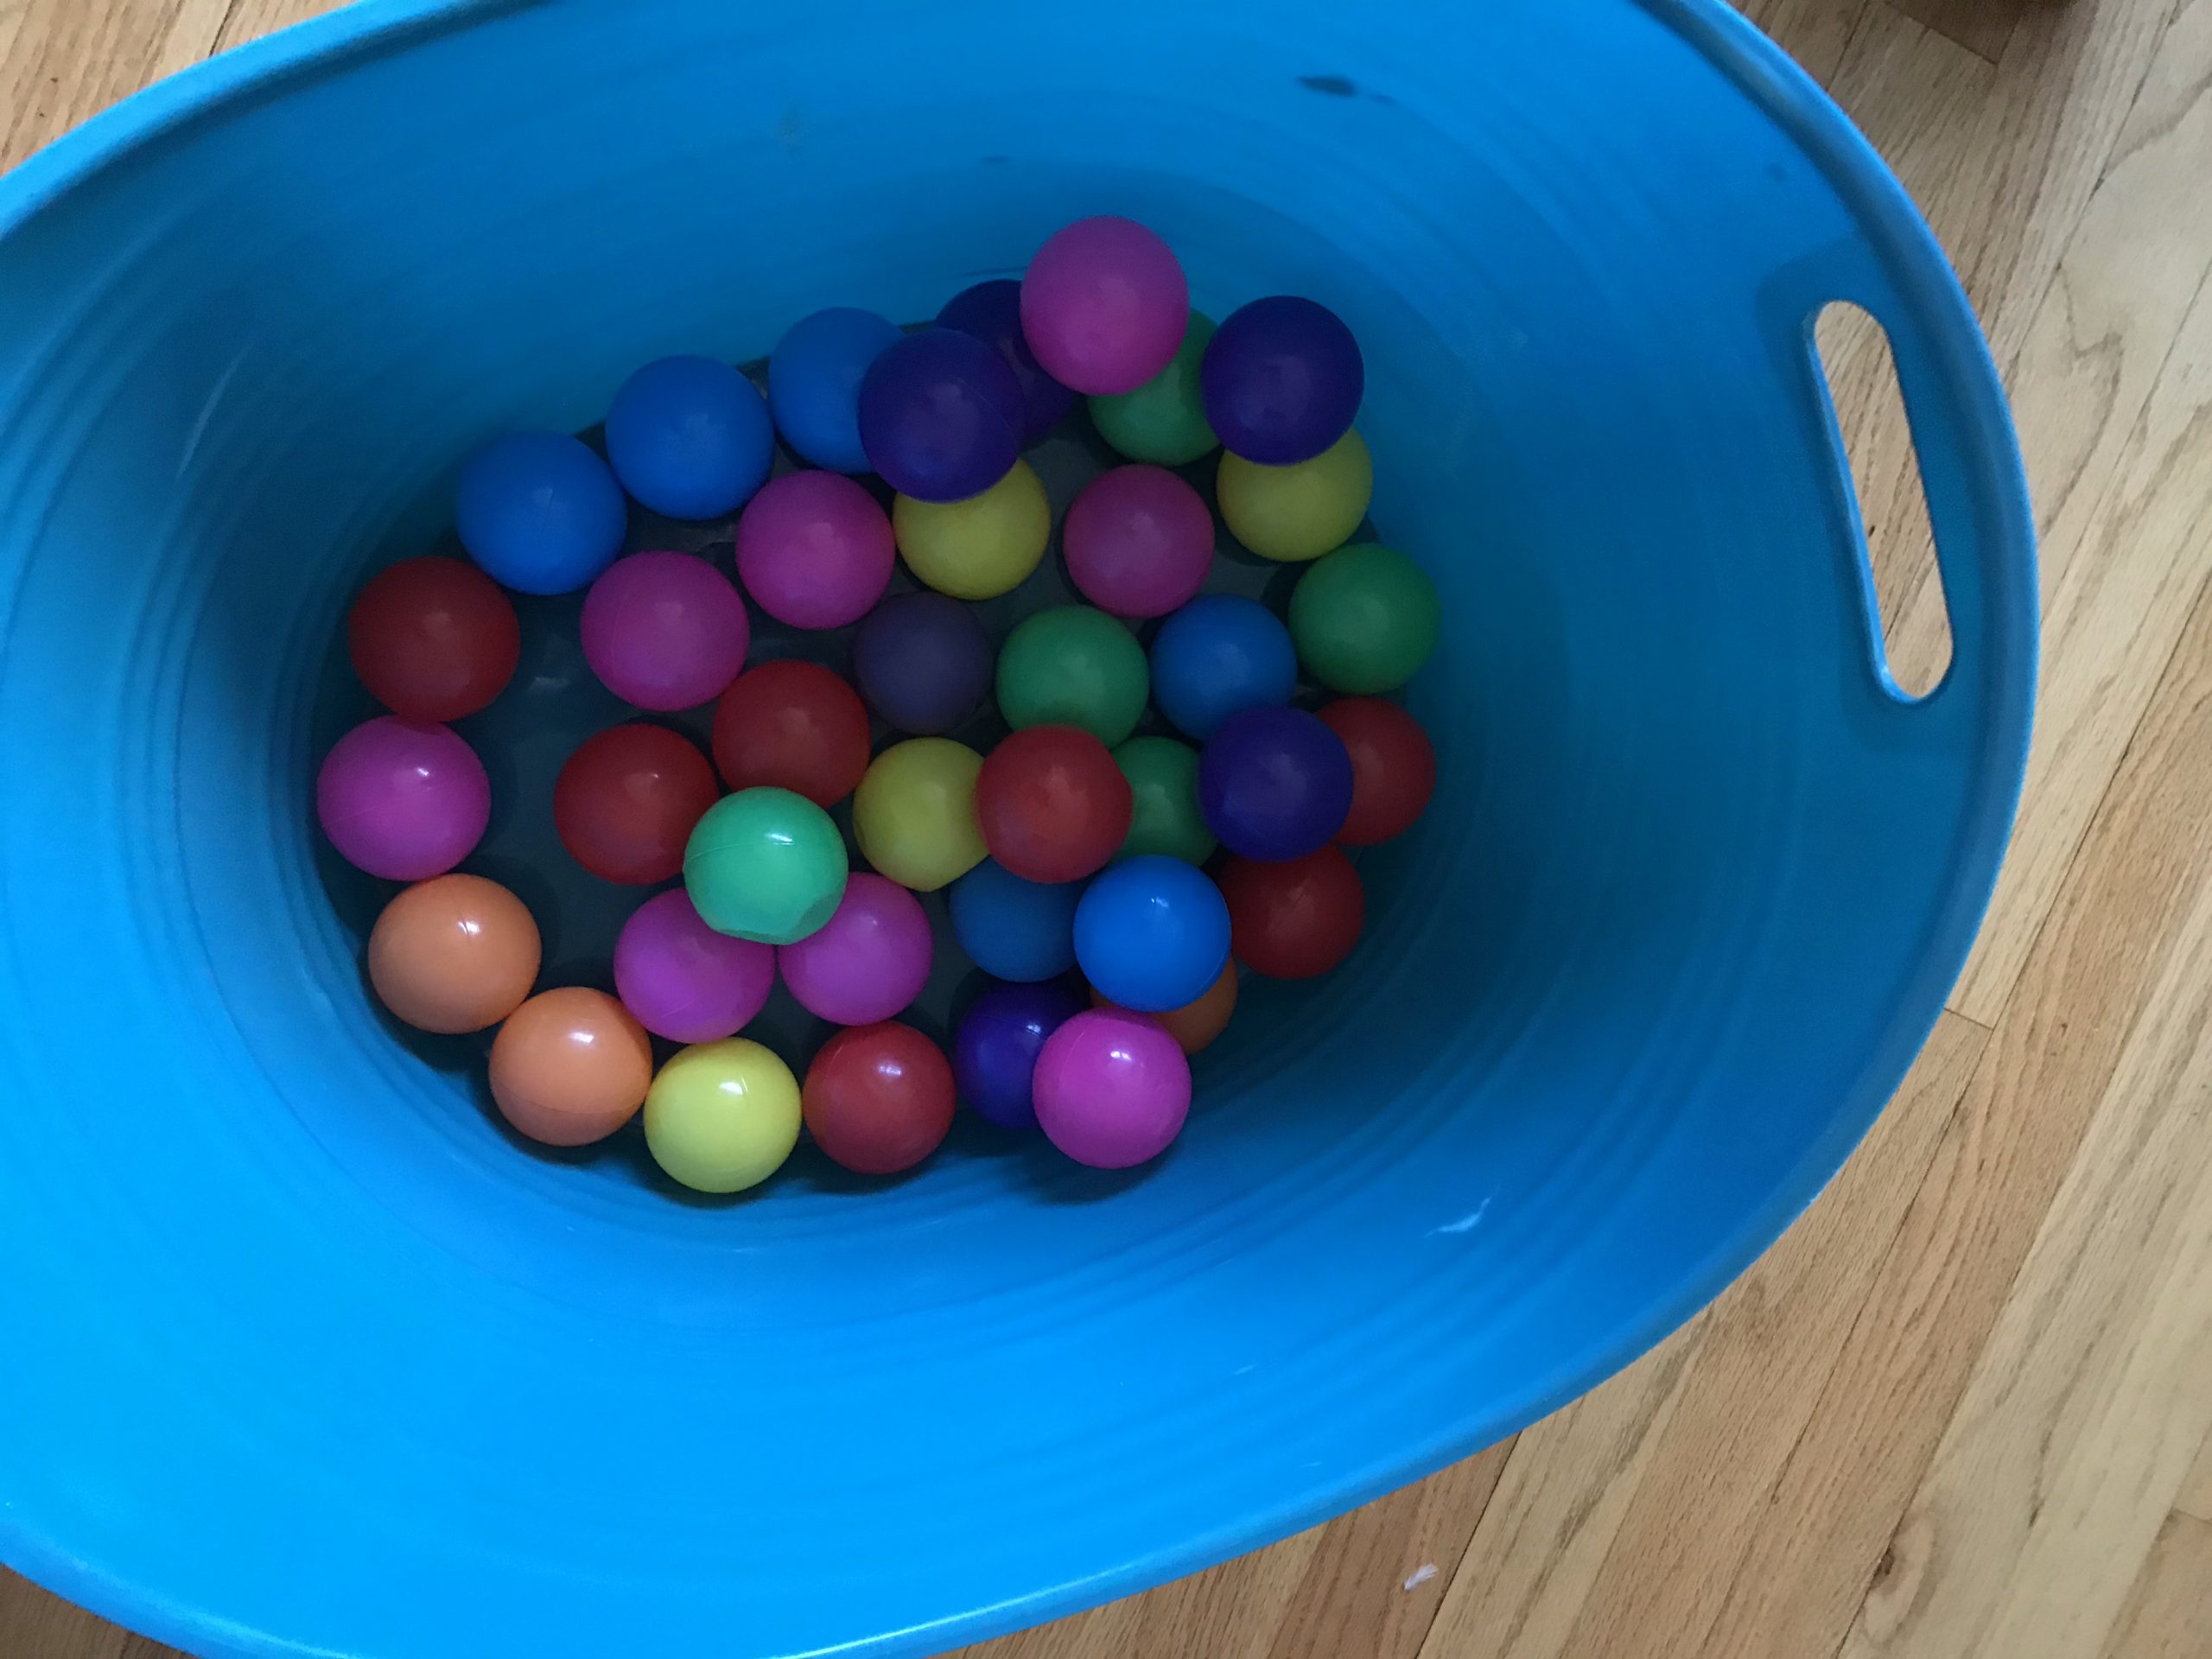 Kid Friendly New England soft ball pit balls for gaming